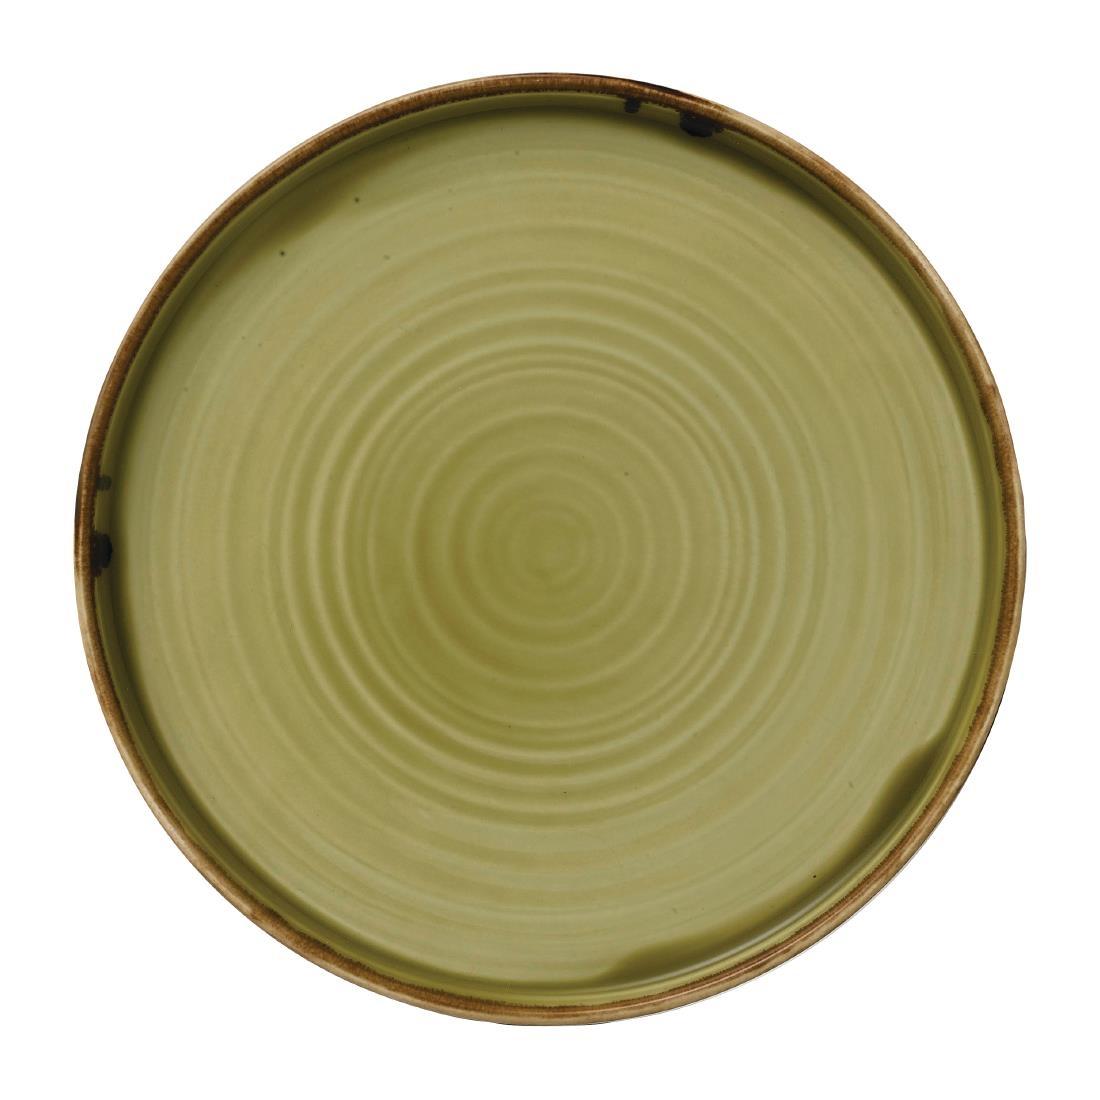 Dudson Harvest Green Walled Plate 260mm (Pack of 6) - FE395  - 1